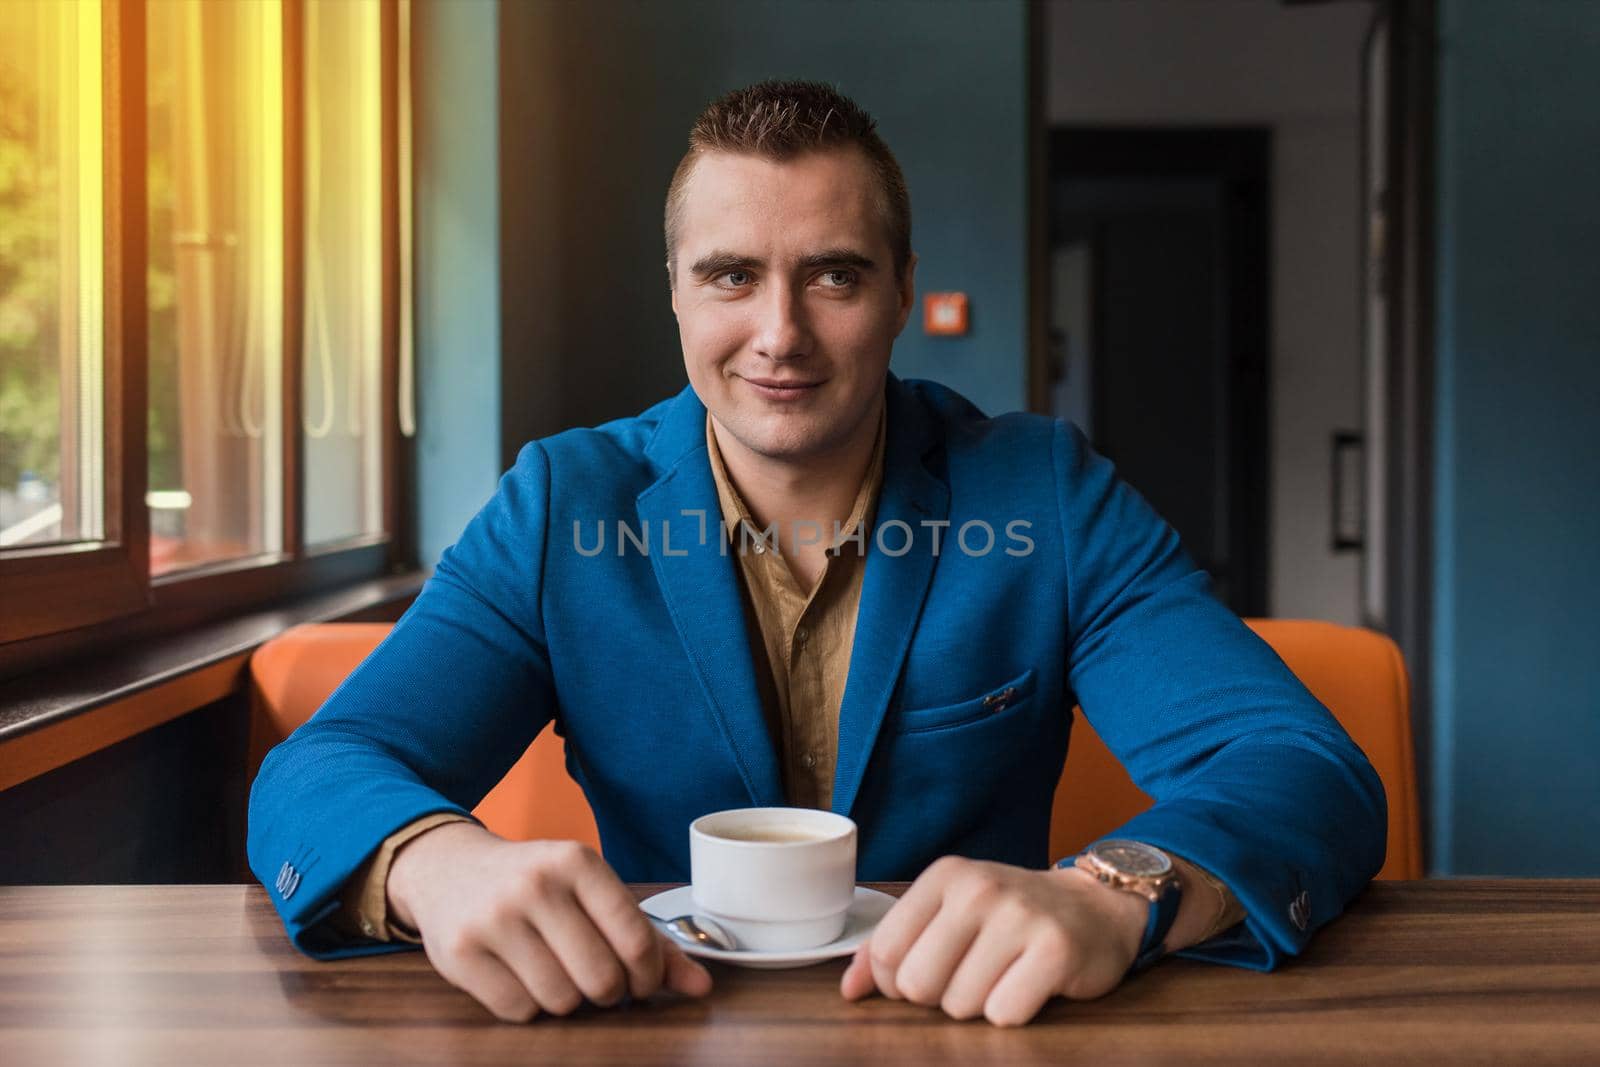 A adult, businessman portrait of Caucasian appearance in a blue jacket and brown shirt sits at a table in a cafe with a cup of coffee on a break.